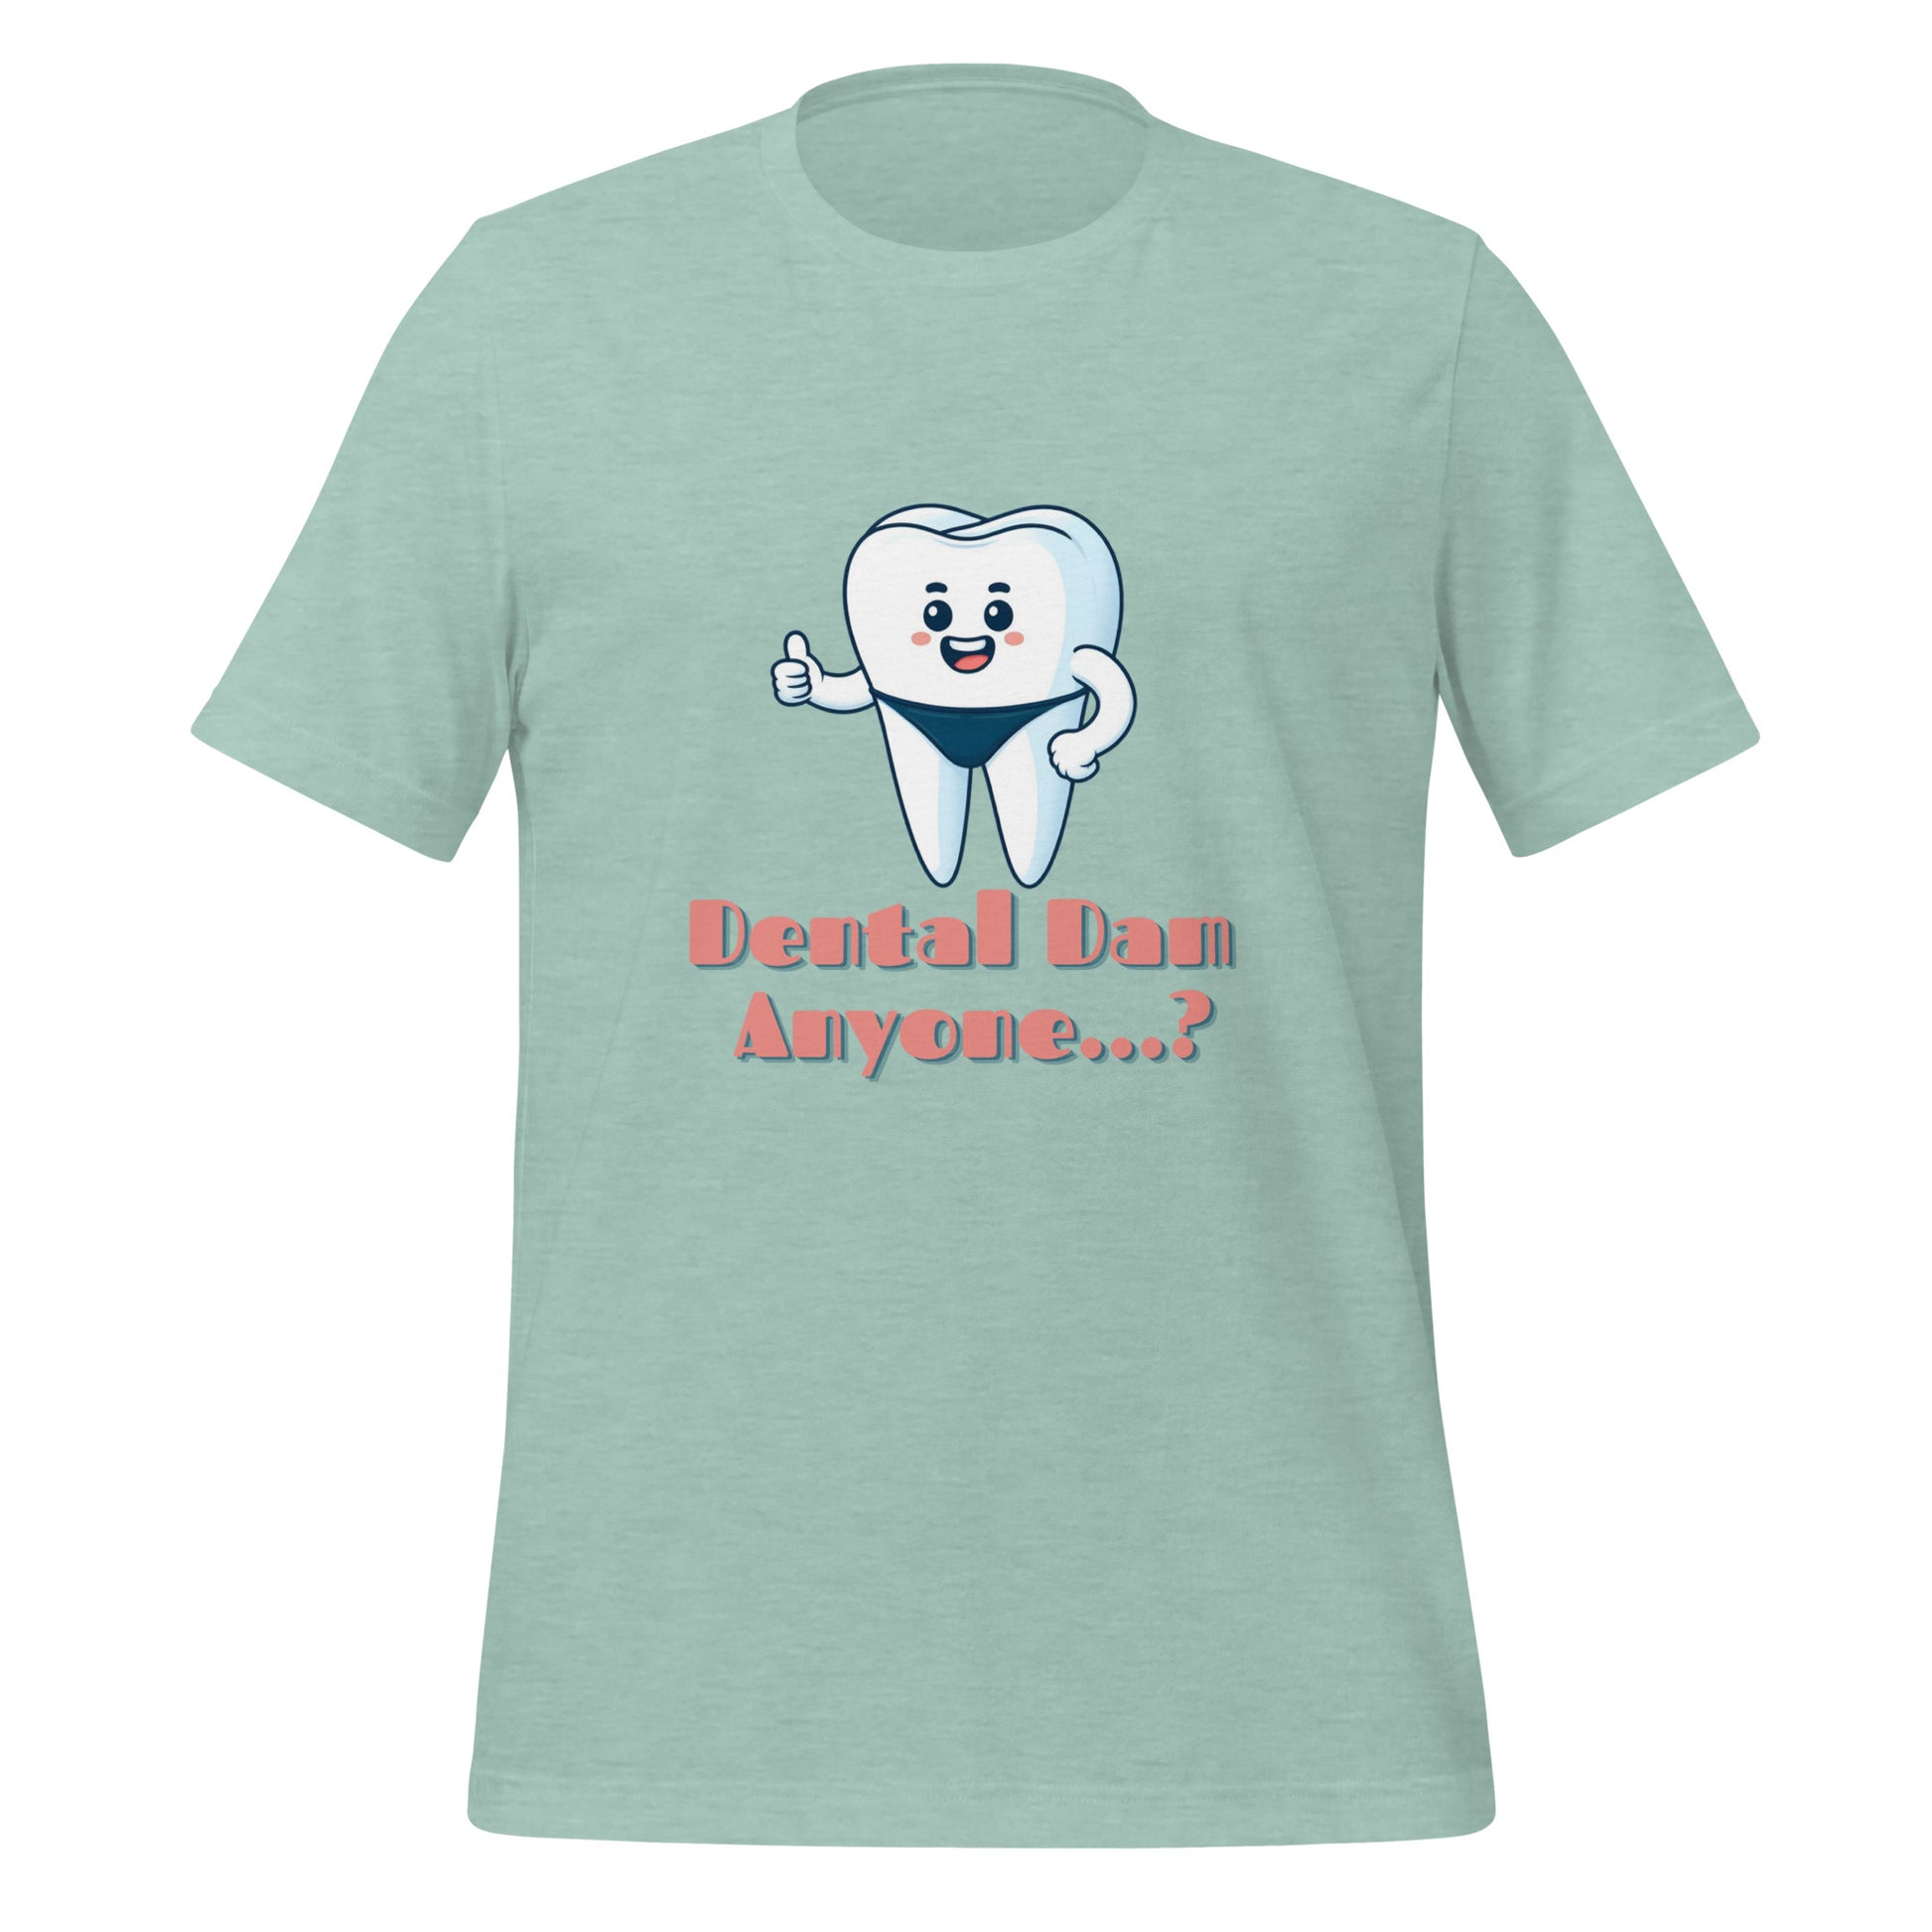 Funny dental shirt featuring a playful tooth character in a speedo with the text ‘Dental Dam Anyone?’, perfect for dentists, dental hygienists, and dental students who enjoy dental humor. This dental shirt is a unique addition to any dental professional’s wardrobe, making it an ideal dental office shirt. Don’t miss out on our dental assistant shirts and dental hygiene shirts. Heather prism dusty blue color.